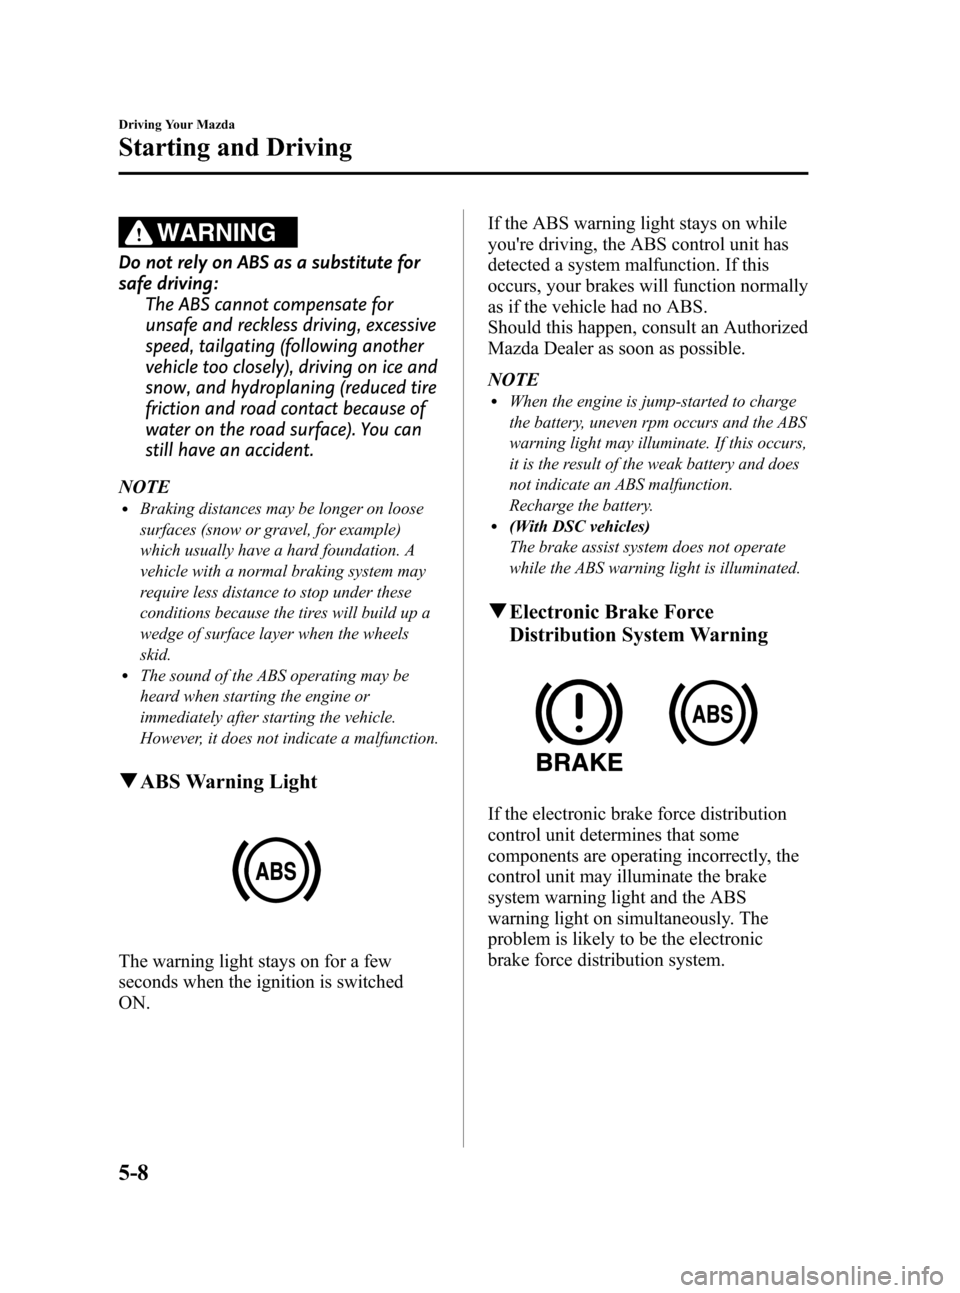 MAZDA MODEL 3 HATCHBACK 2010  Owners Manual (in English) Black plate (164,1)
WARNING
Do not rely on ABS as a substitute for
safe driving:
The ABS cannot compensate for
unsafe and reckless driving, excessive
speed, tailgating (following another
vehicle too c